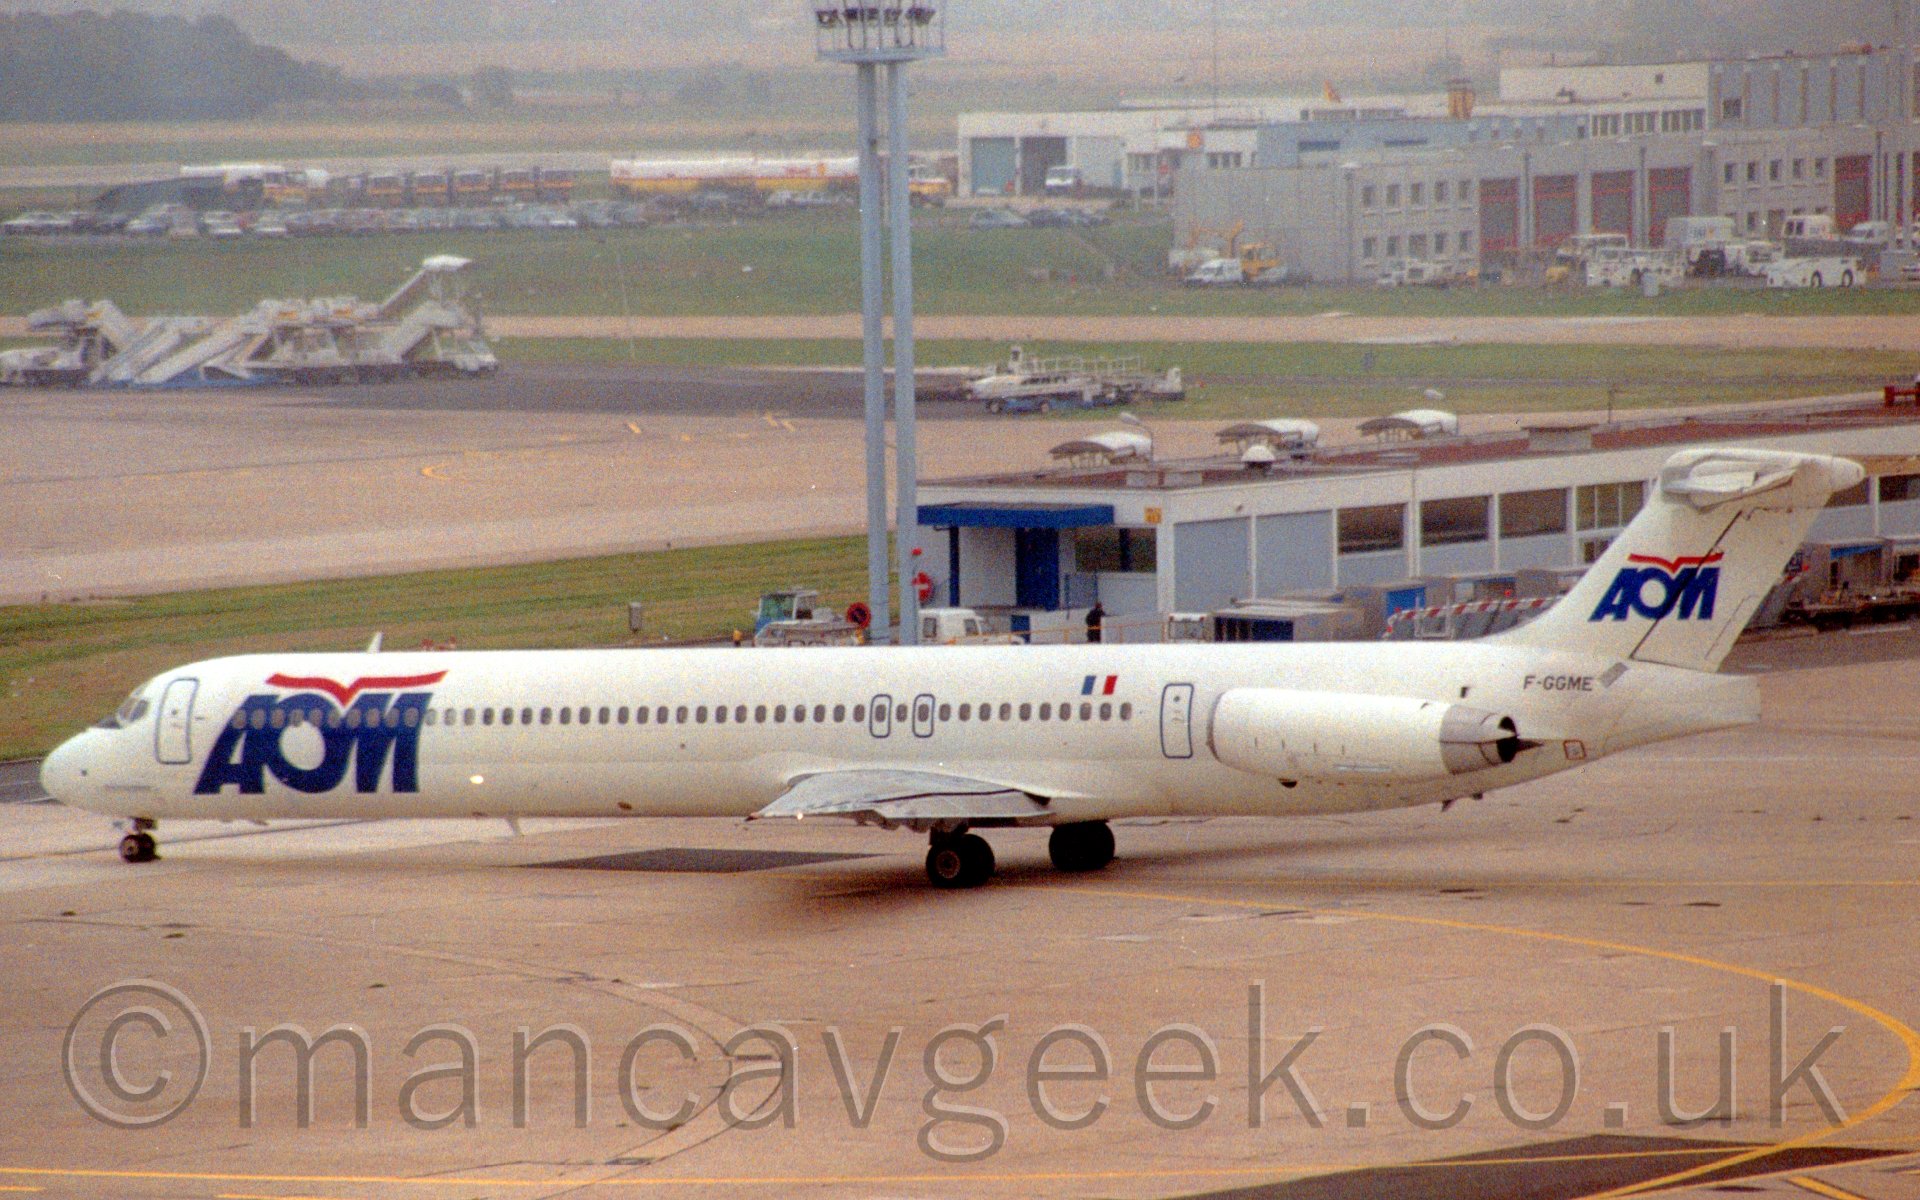 Side view of a white, twin engined jet airliner with the engines mounted on the rear fuselage, taxiing from right to left, at a seemingly deserted airport.